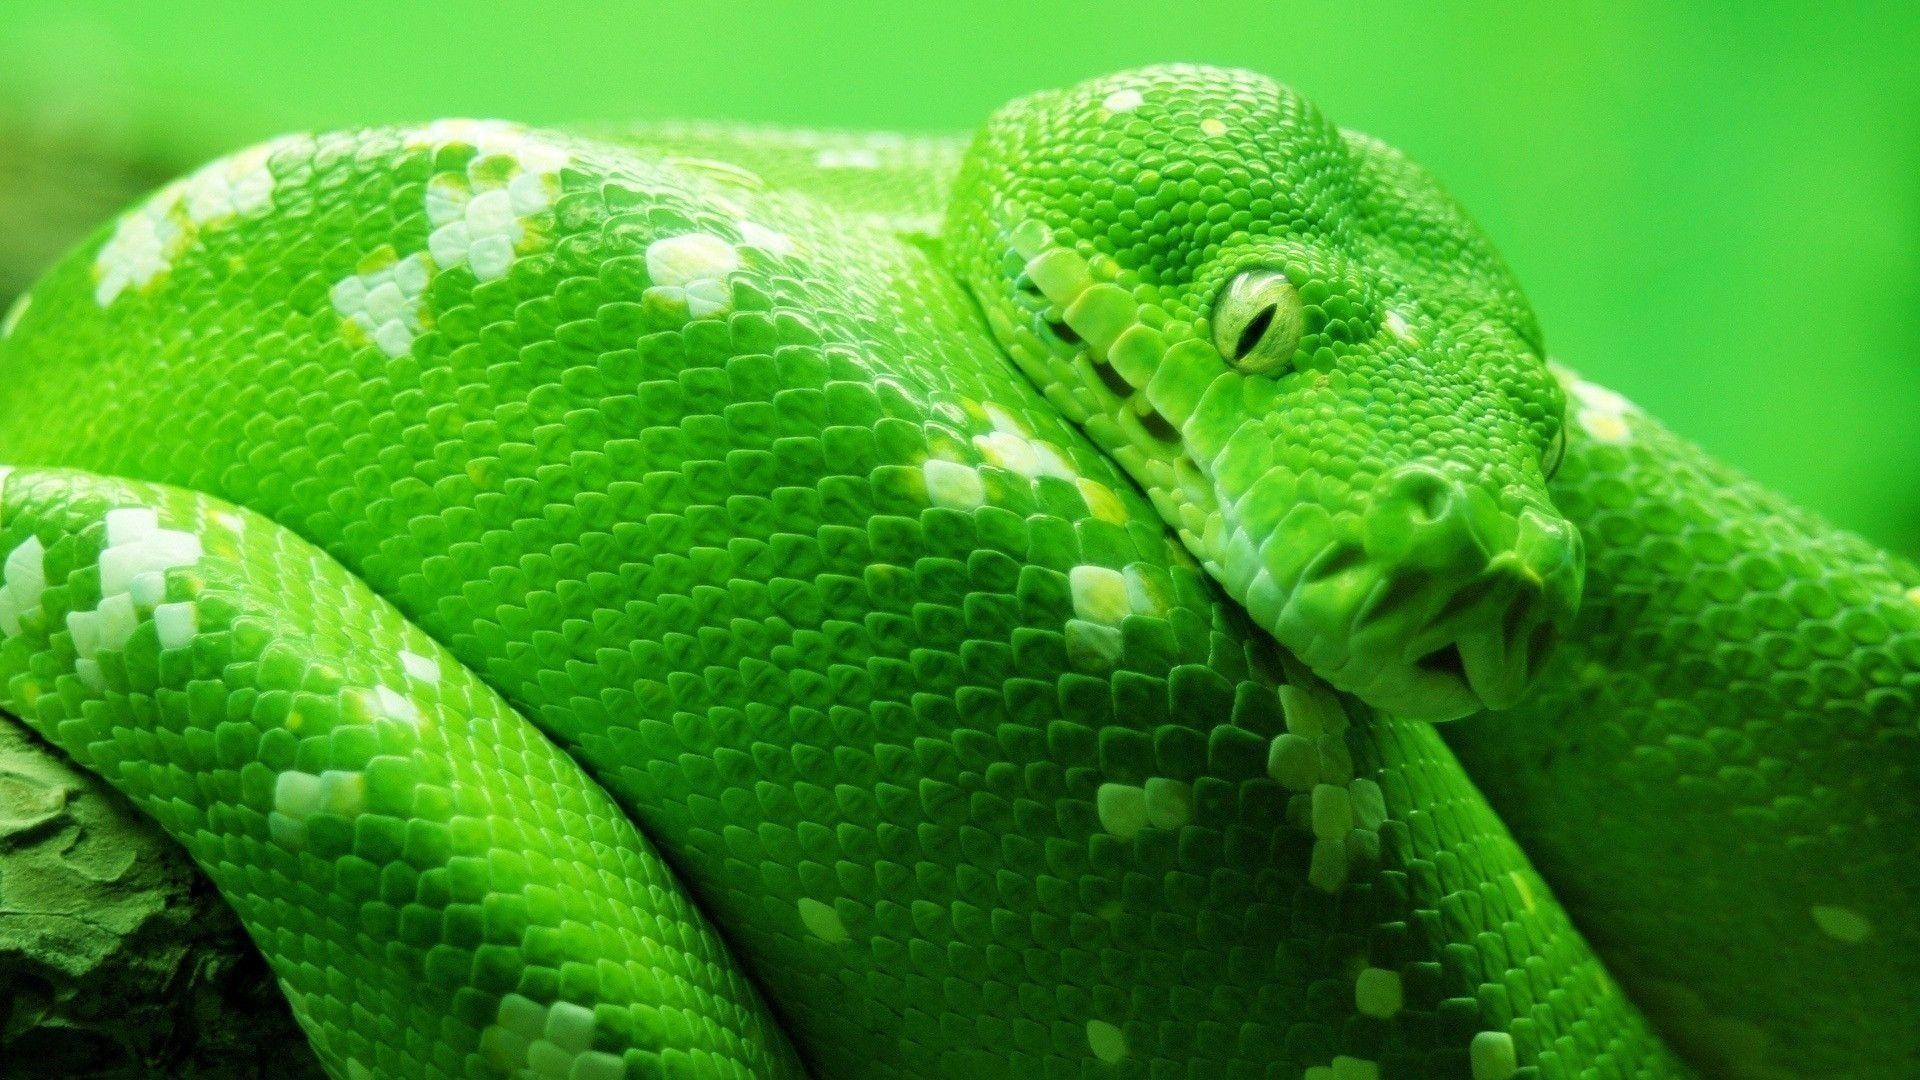 1920x1080 Cool Hd Green Snake Wallpaper | Download wallpapers page